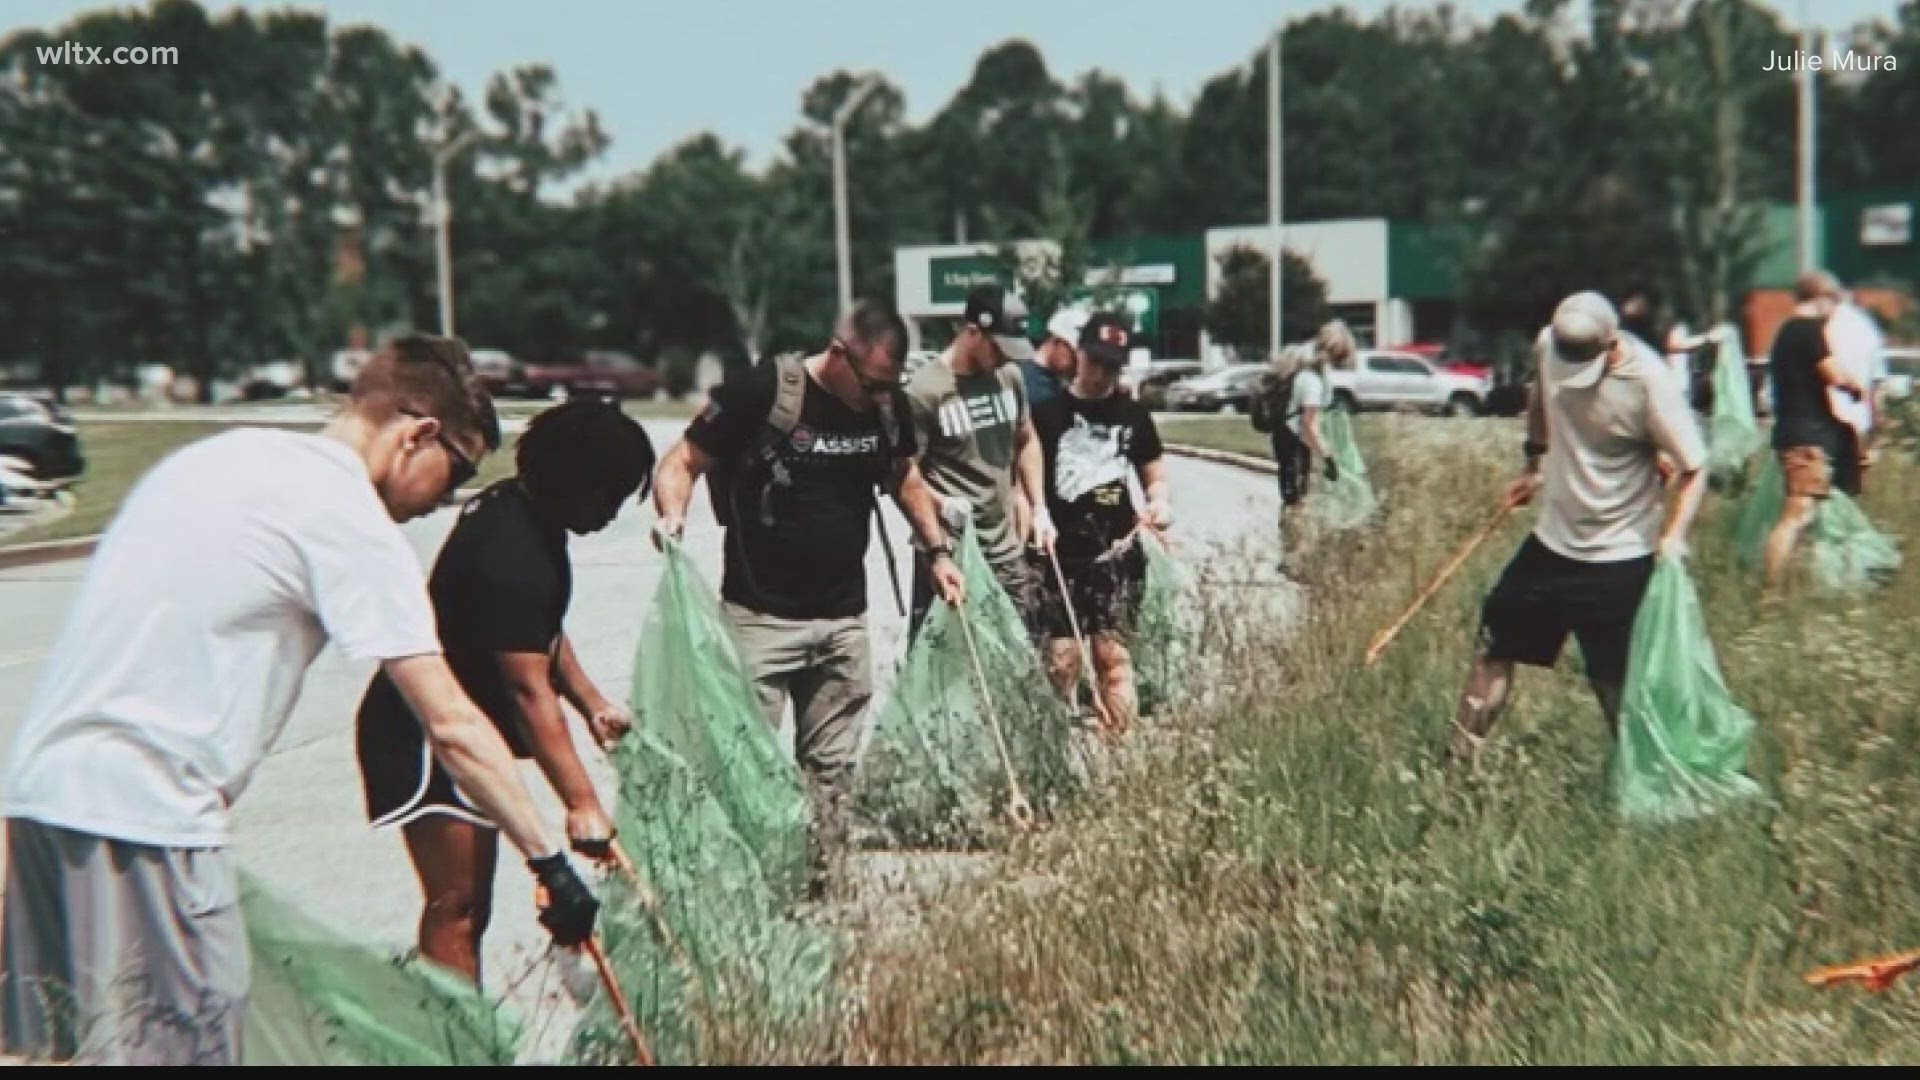 The couple has cleaned up over 7500 pounds of trash in Kershaw county.